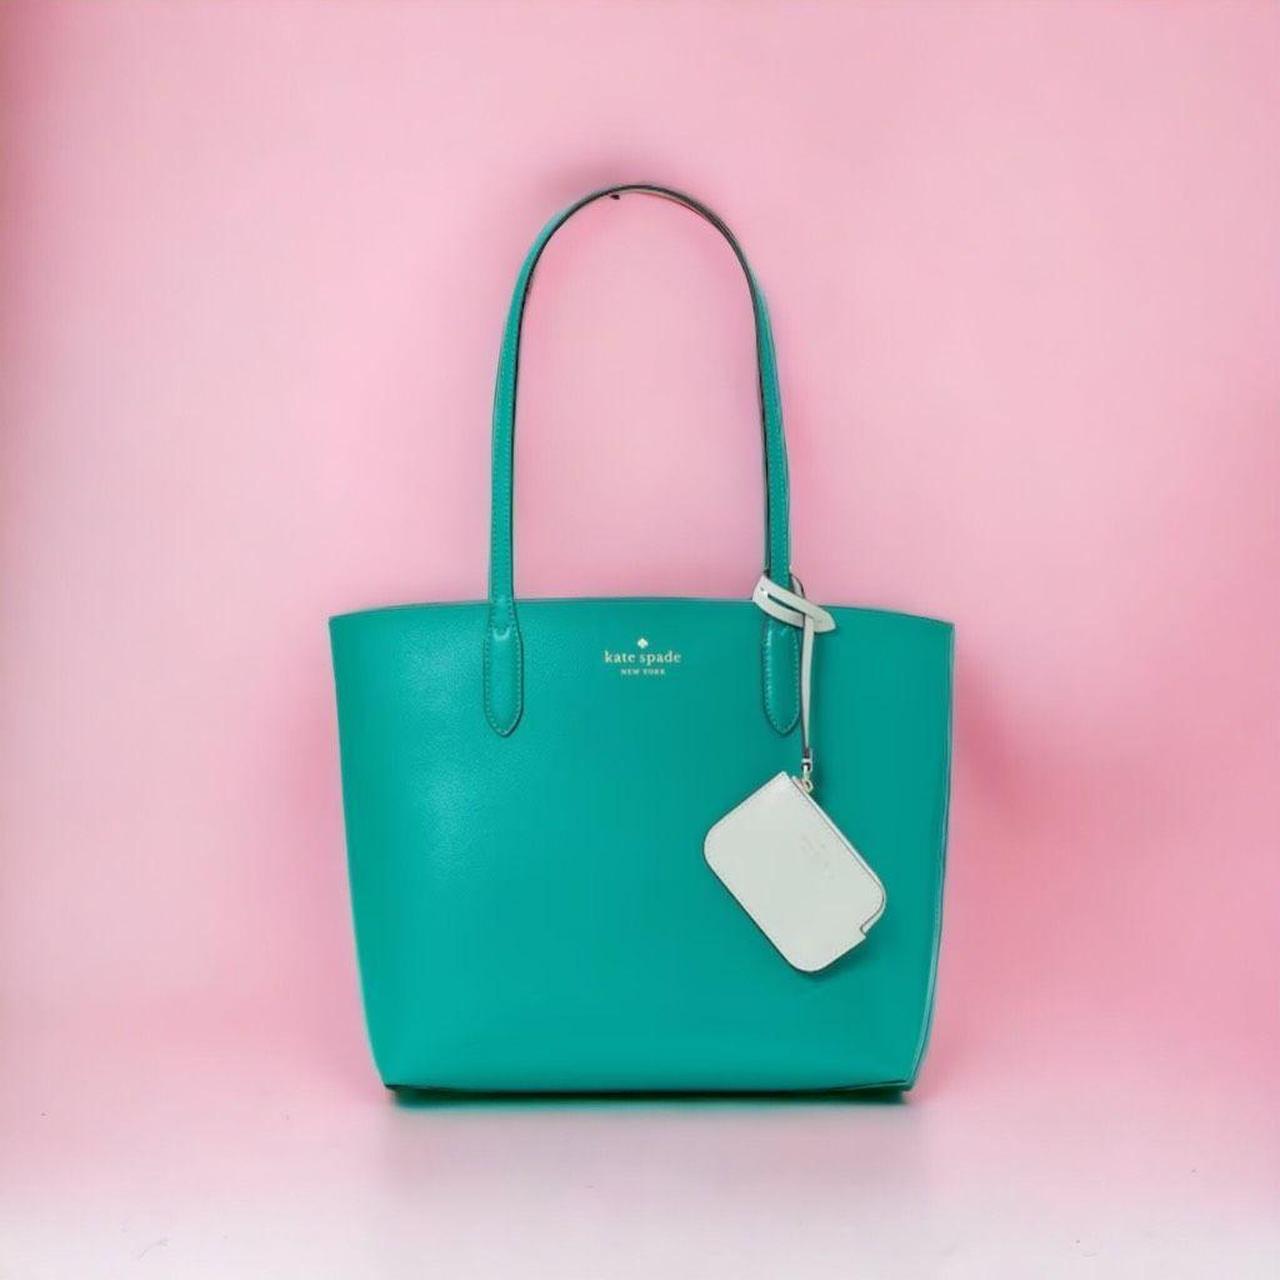 Turquoise Leather Kate Spade Tote Authentic Kate... - Depop